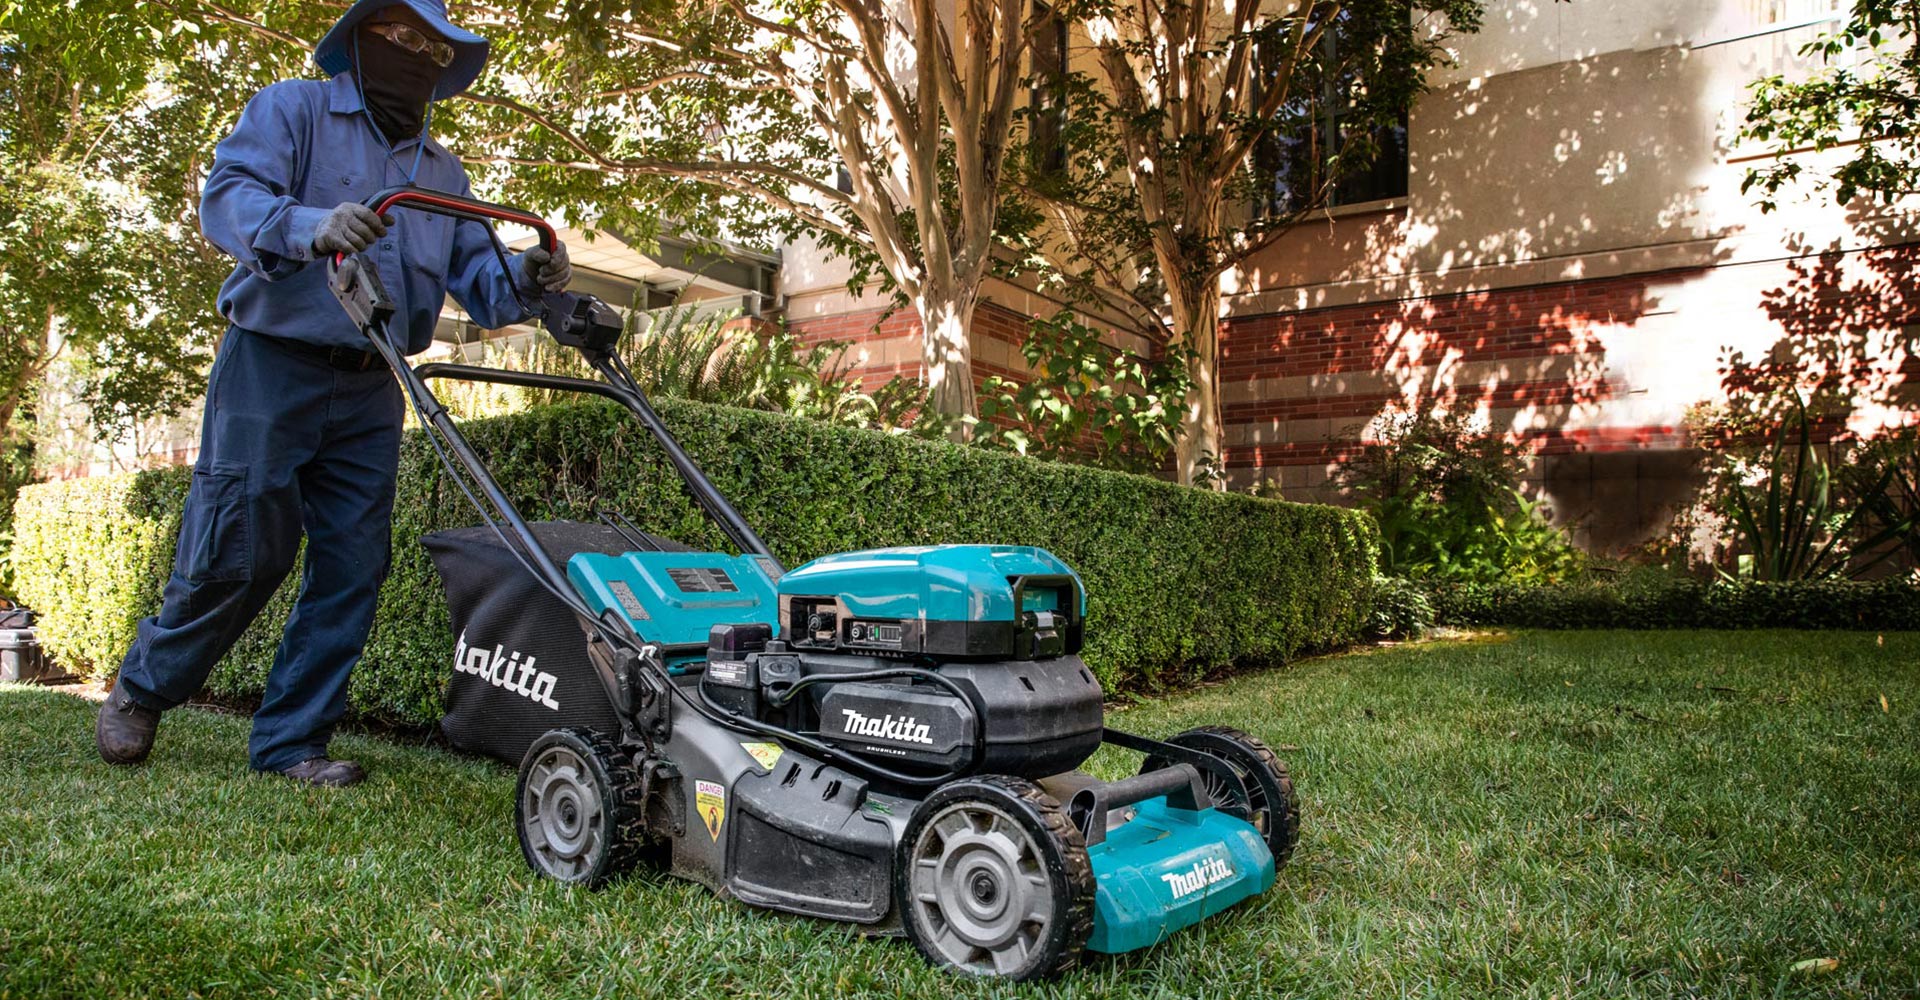 HIGHER CAPACITY. NO GAS.SELF-PROPELLED WITH BRUSHLESS MOTOR FOR FASTER CUTTING